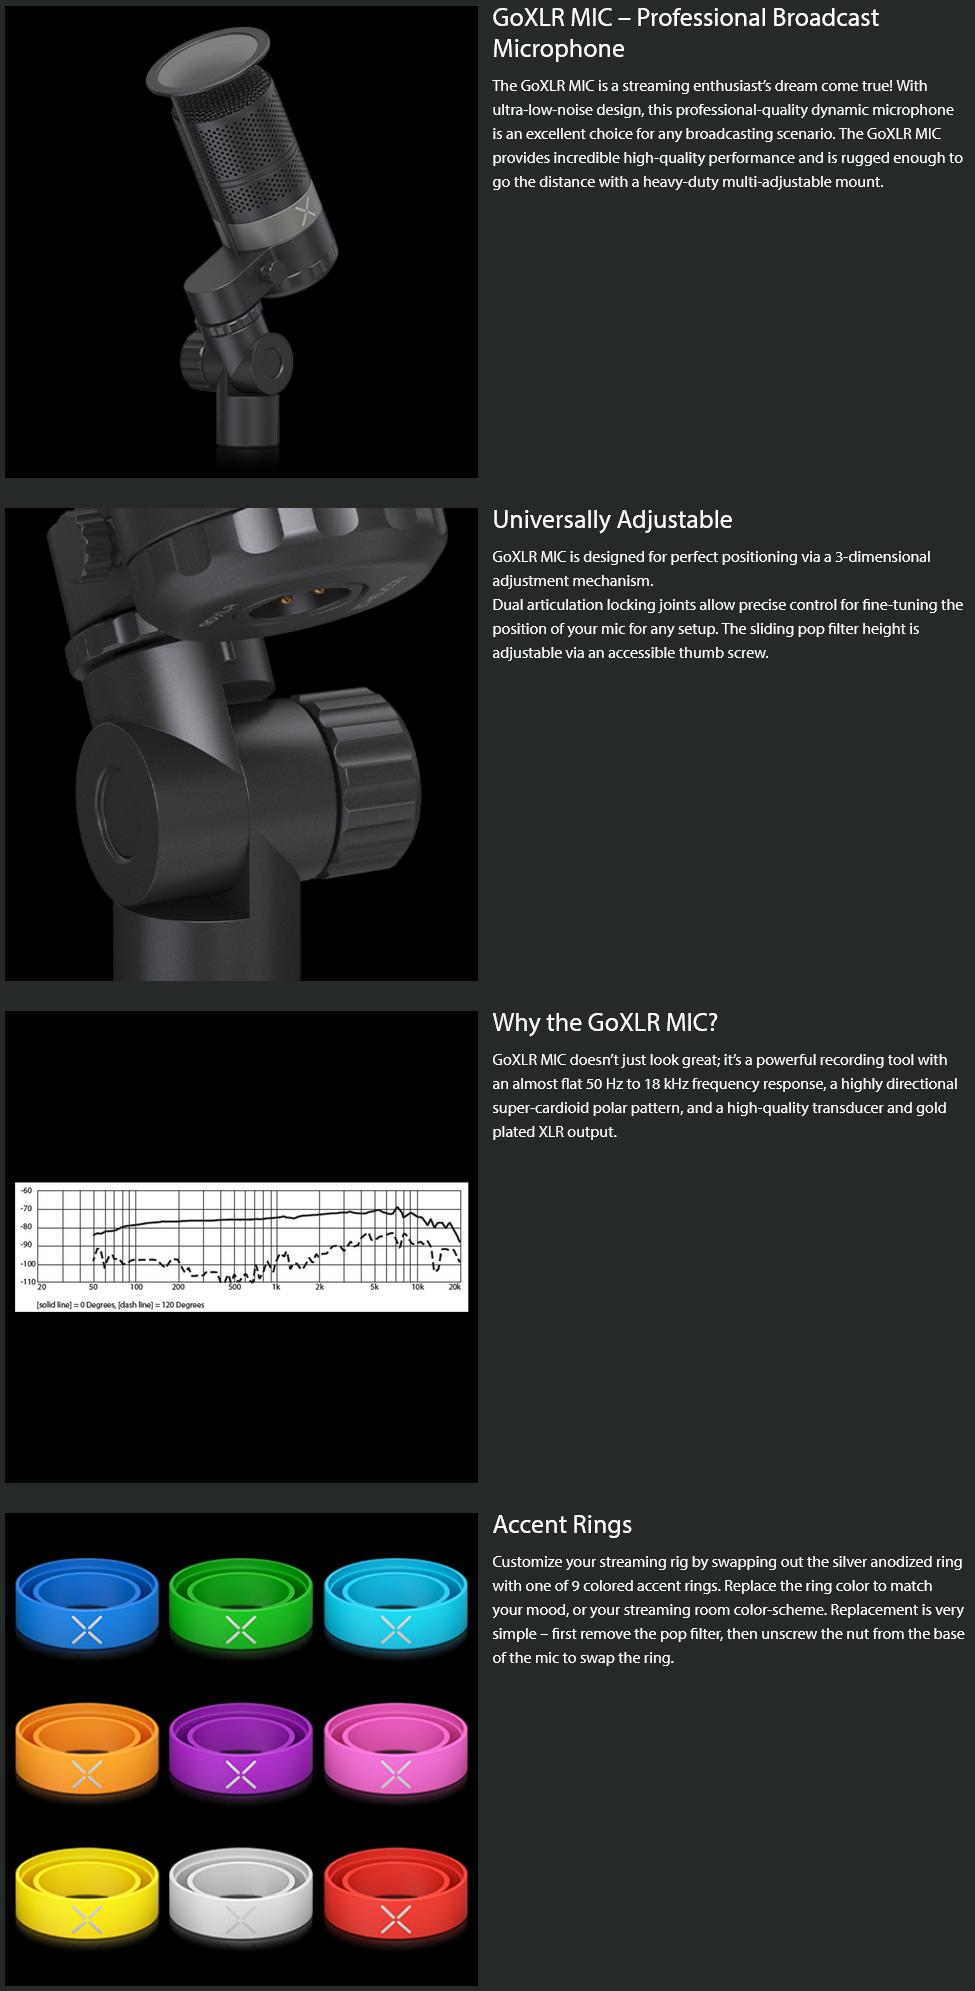 A large marketing image providing additional information about the product TC Helicon GoXLR MIC Dynamic Broadcast Microphone with Integrated Pop Filter - Black - Additional alt info not provided